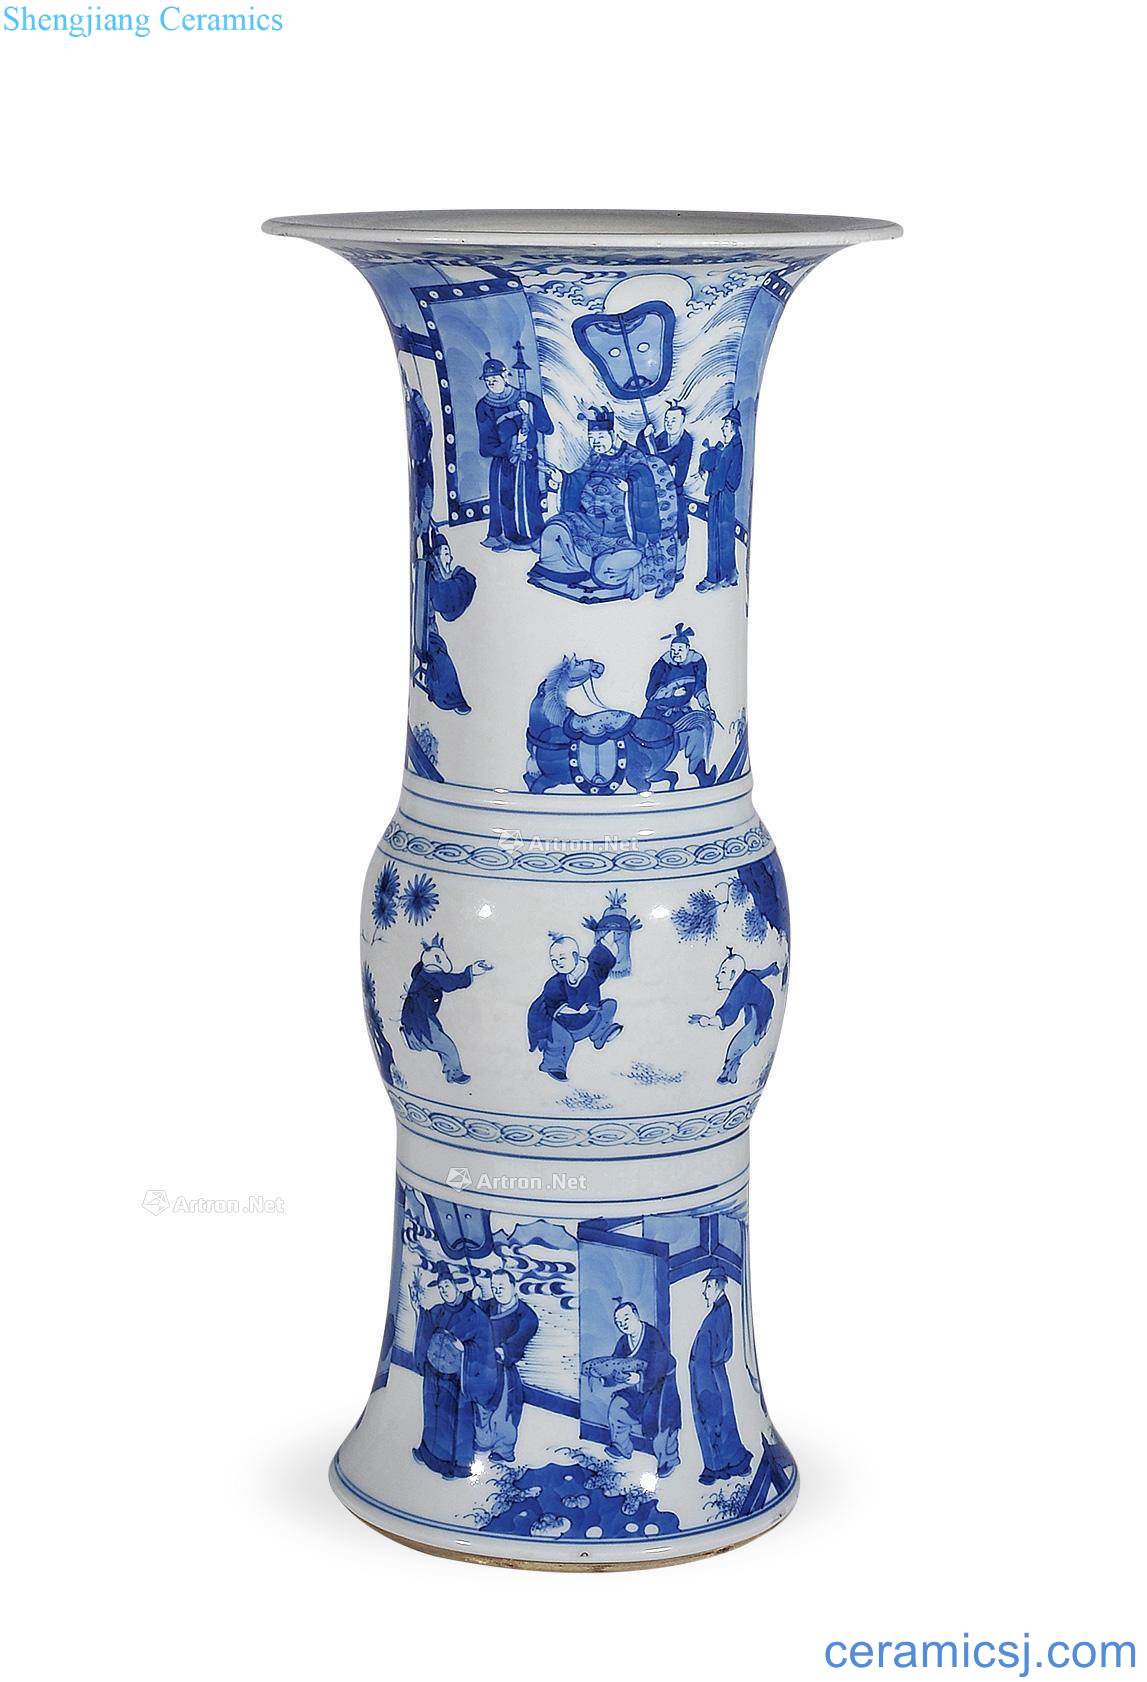 Qing wen vase with blue and white characters